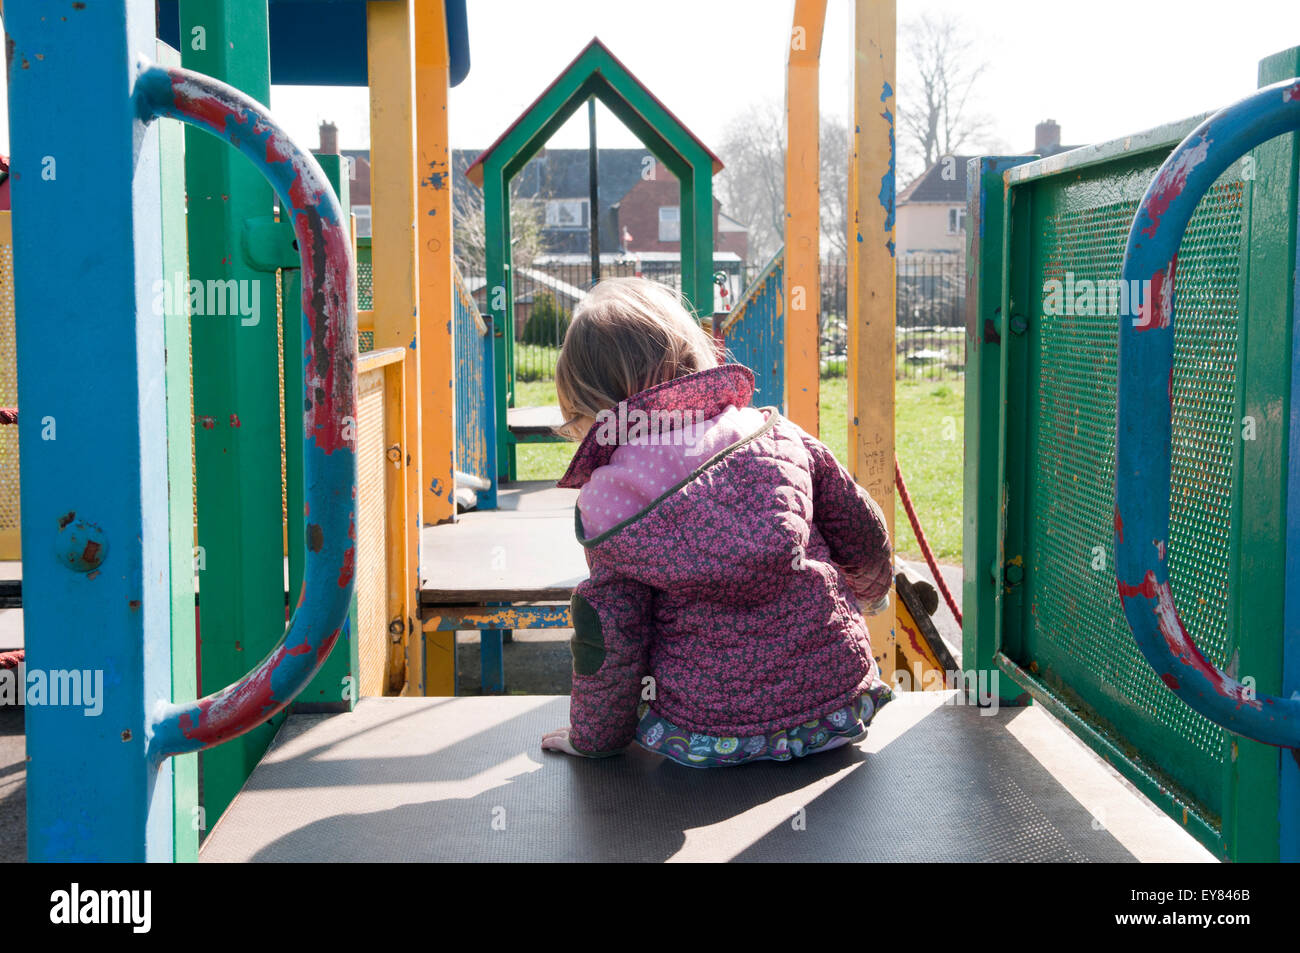 Toddler playing on a climbing frame in the park Stock Photo